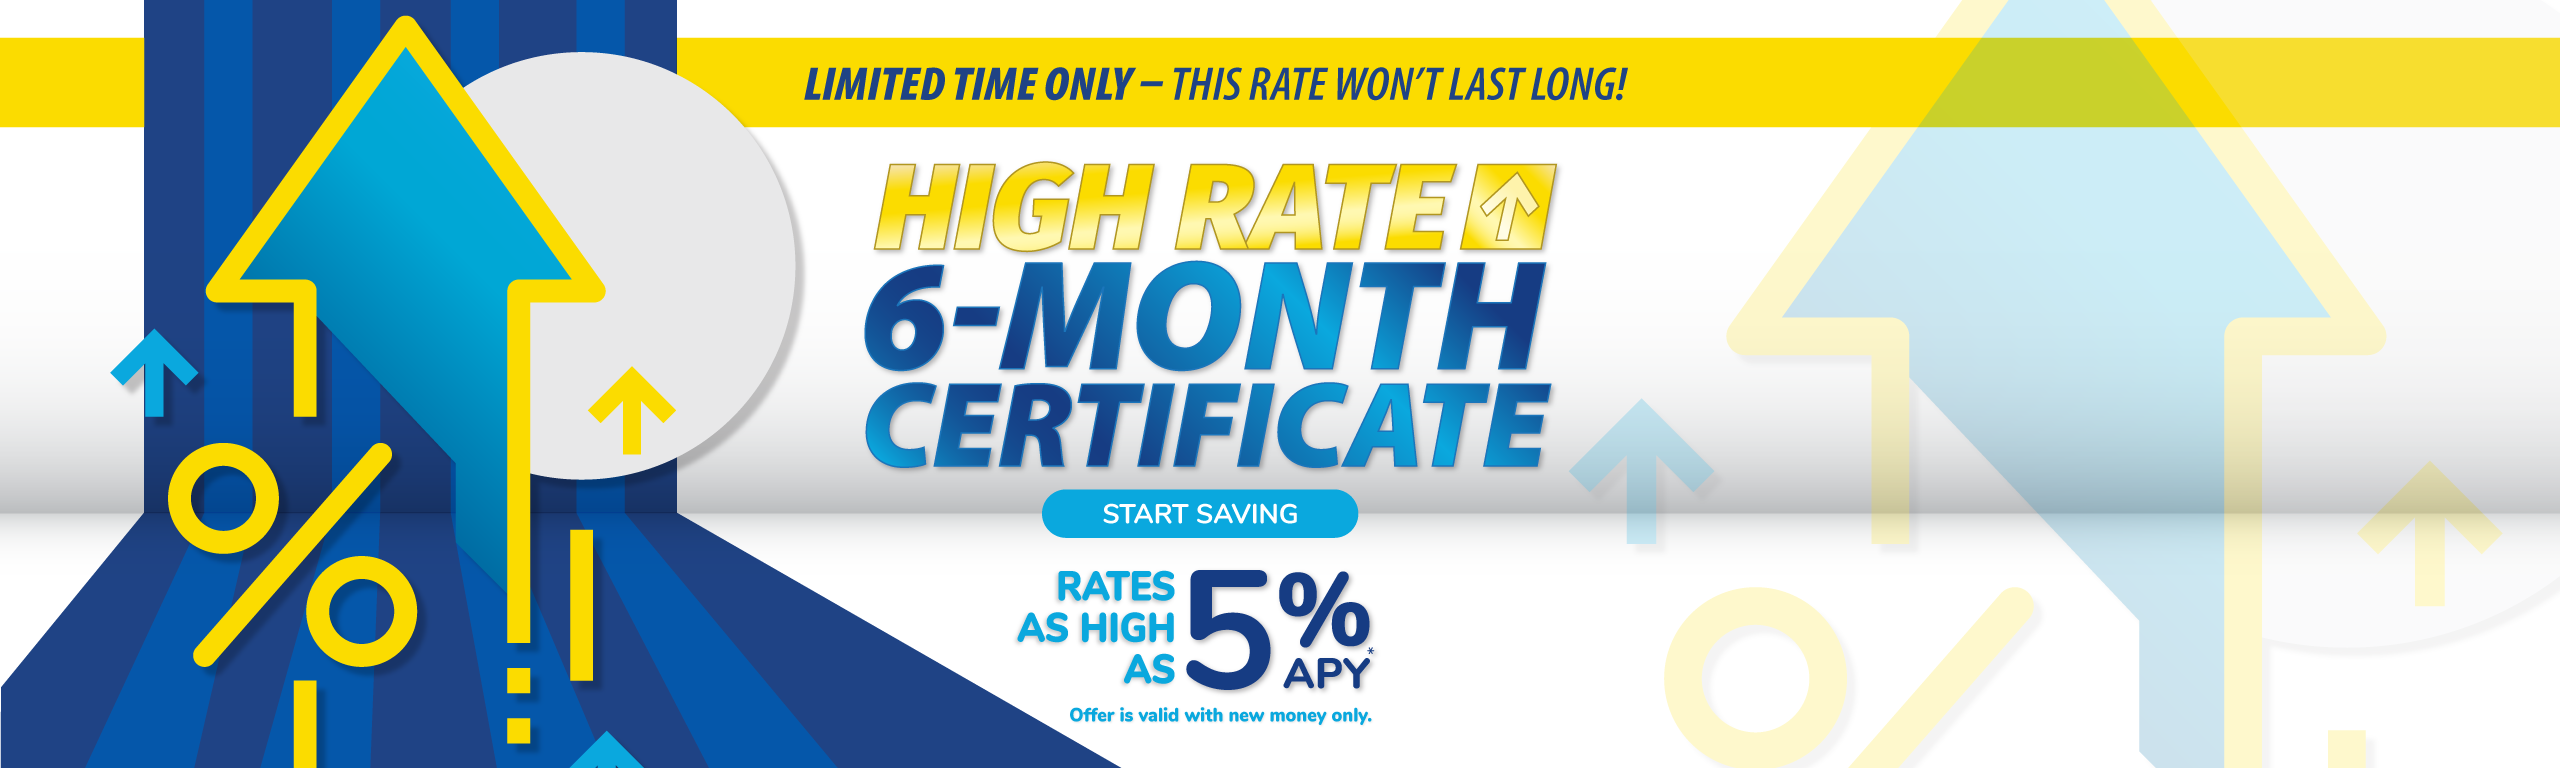 LIMITED TIME: 6 Month Certificate of Deposit for 5% APY on balance of $100,000 or more.